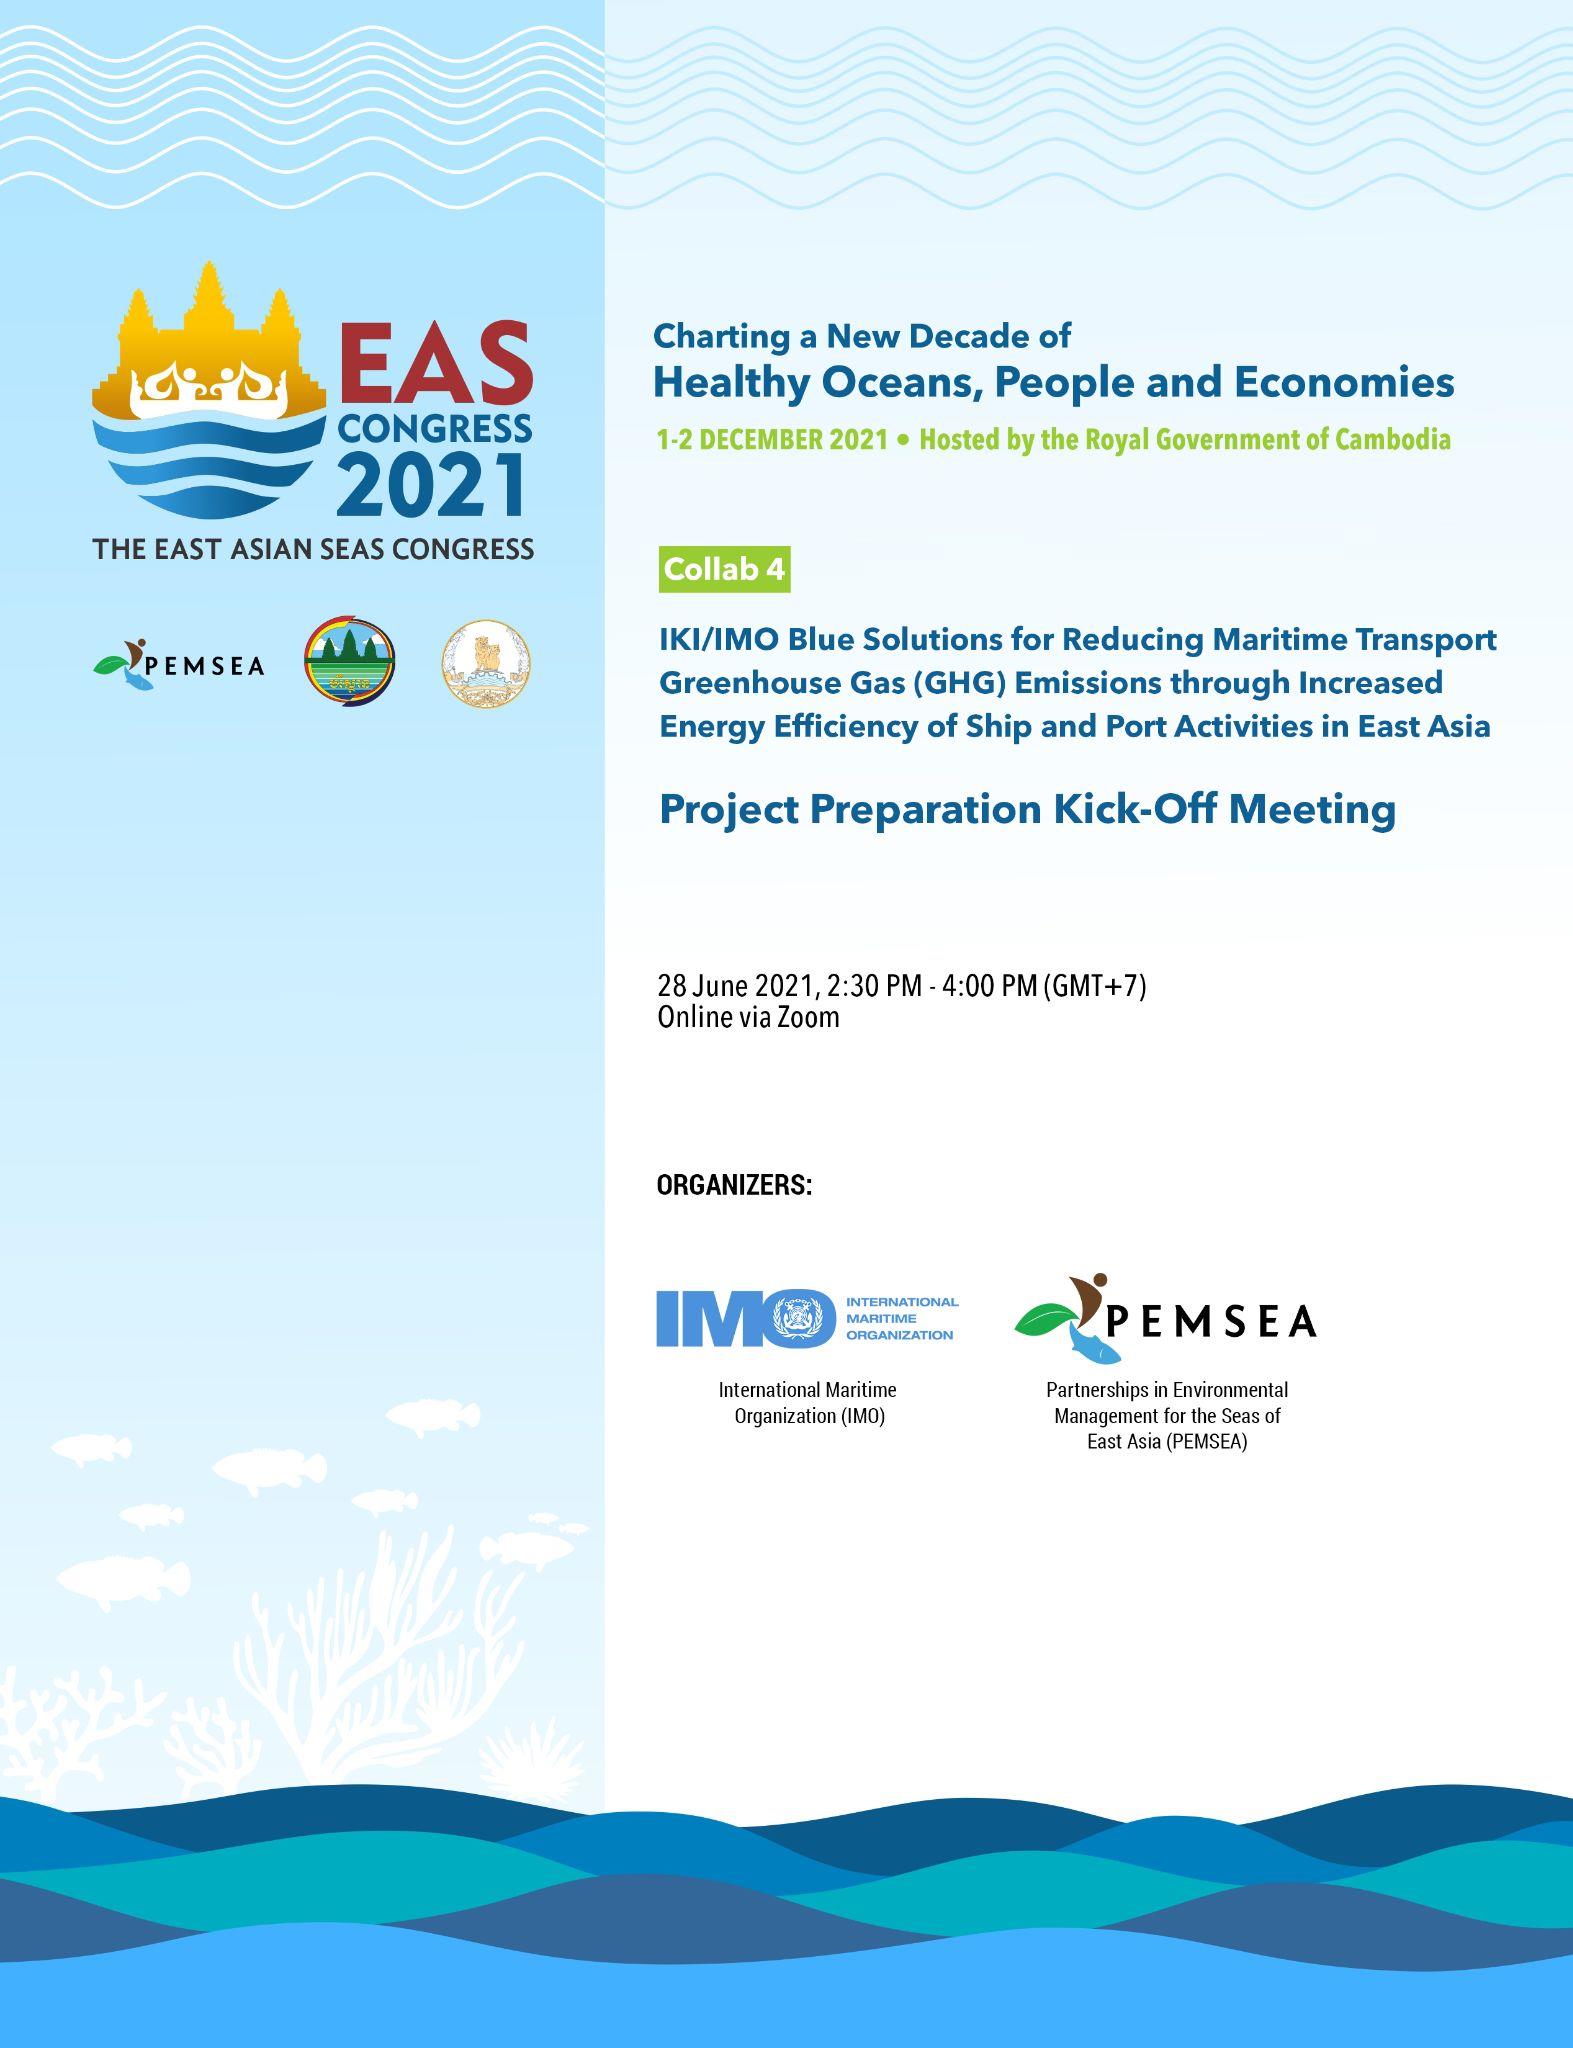 Collab 4 IKI IMO Blue Solutions for Reducing Maritime Transport Greenhouse Gas (GHG) Emissions through Increased Energy Efficiency of Ship and Port Activities in East Asia Project Preparation Kick-Off Meeting